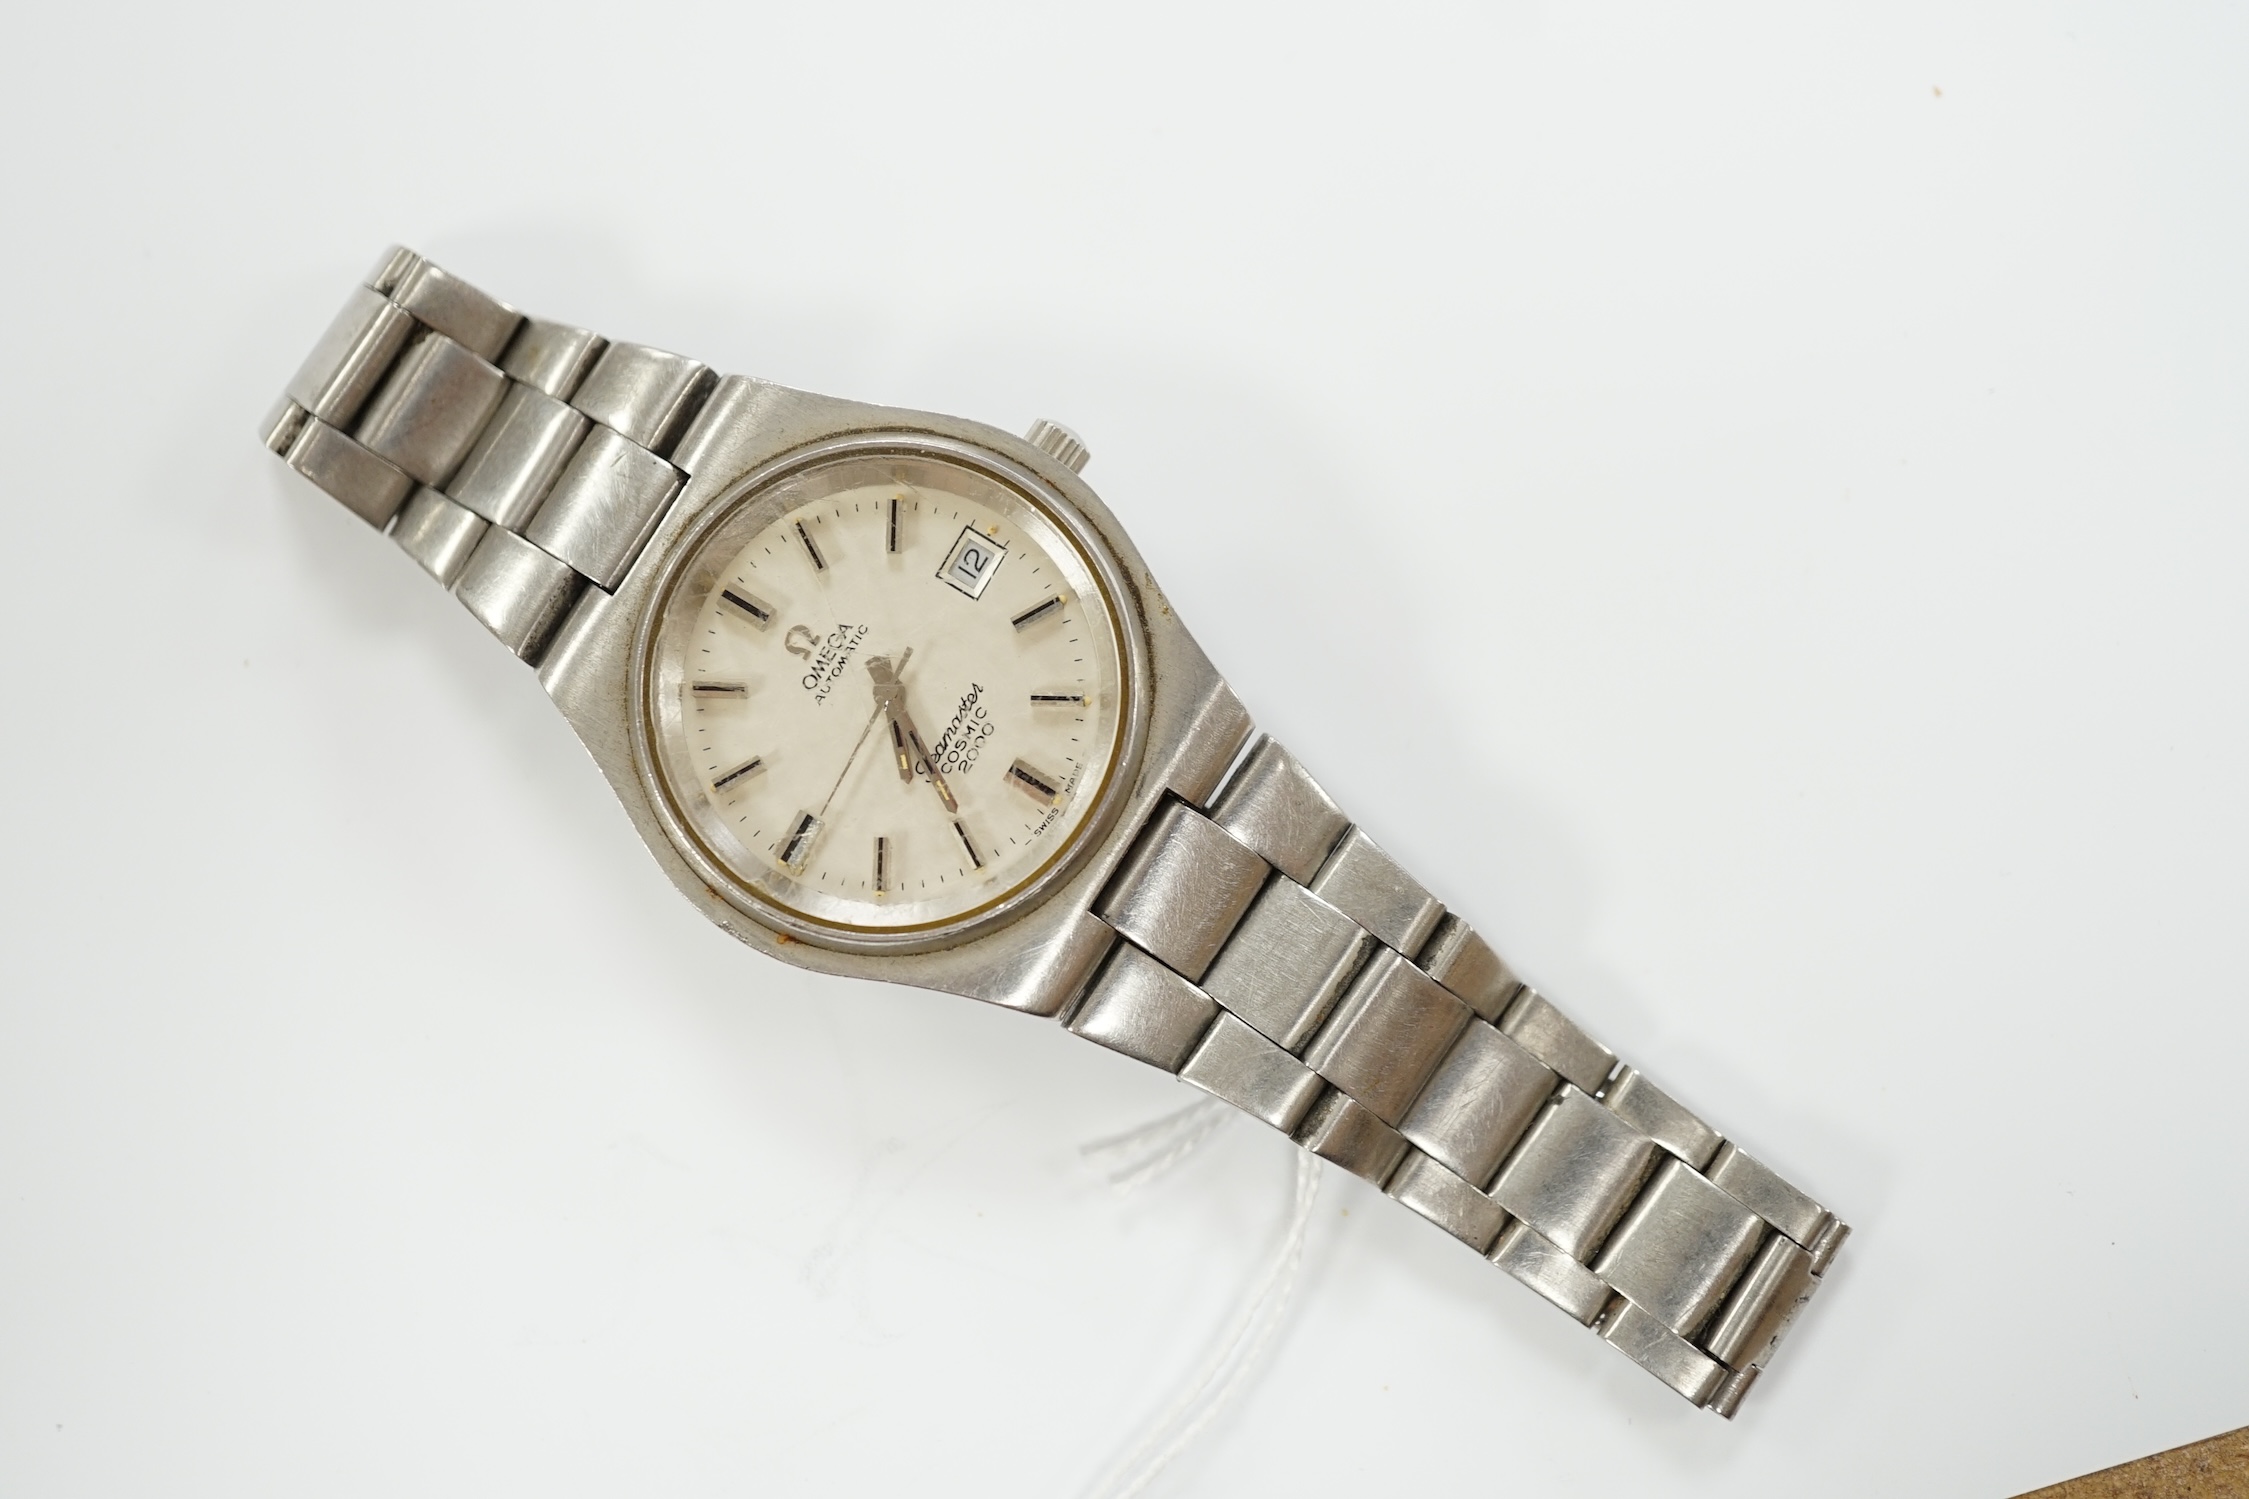 A gentleman's stainless steel Omega Seamaster Cosmic Automatic wrist watch, with baton numerals, on a stainless steel Omega bracelet, no box or papers.